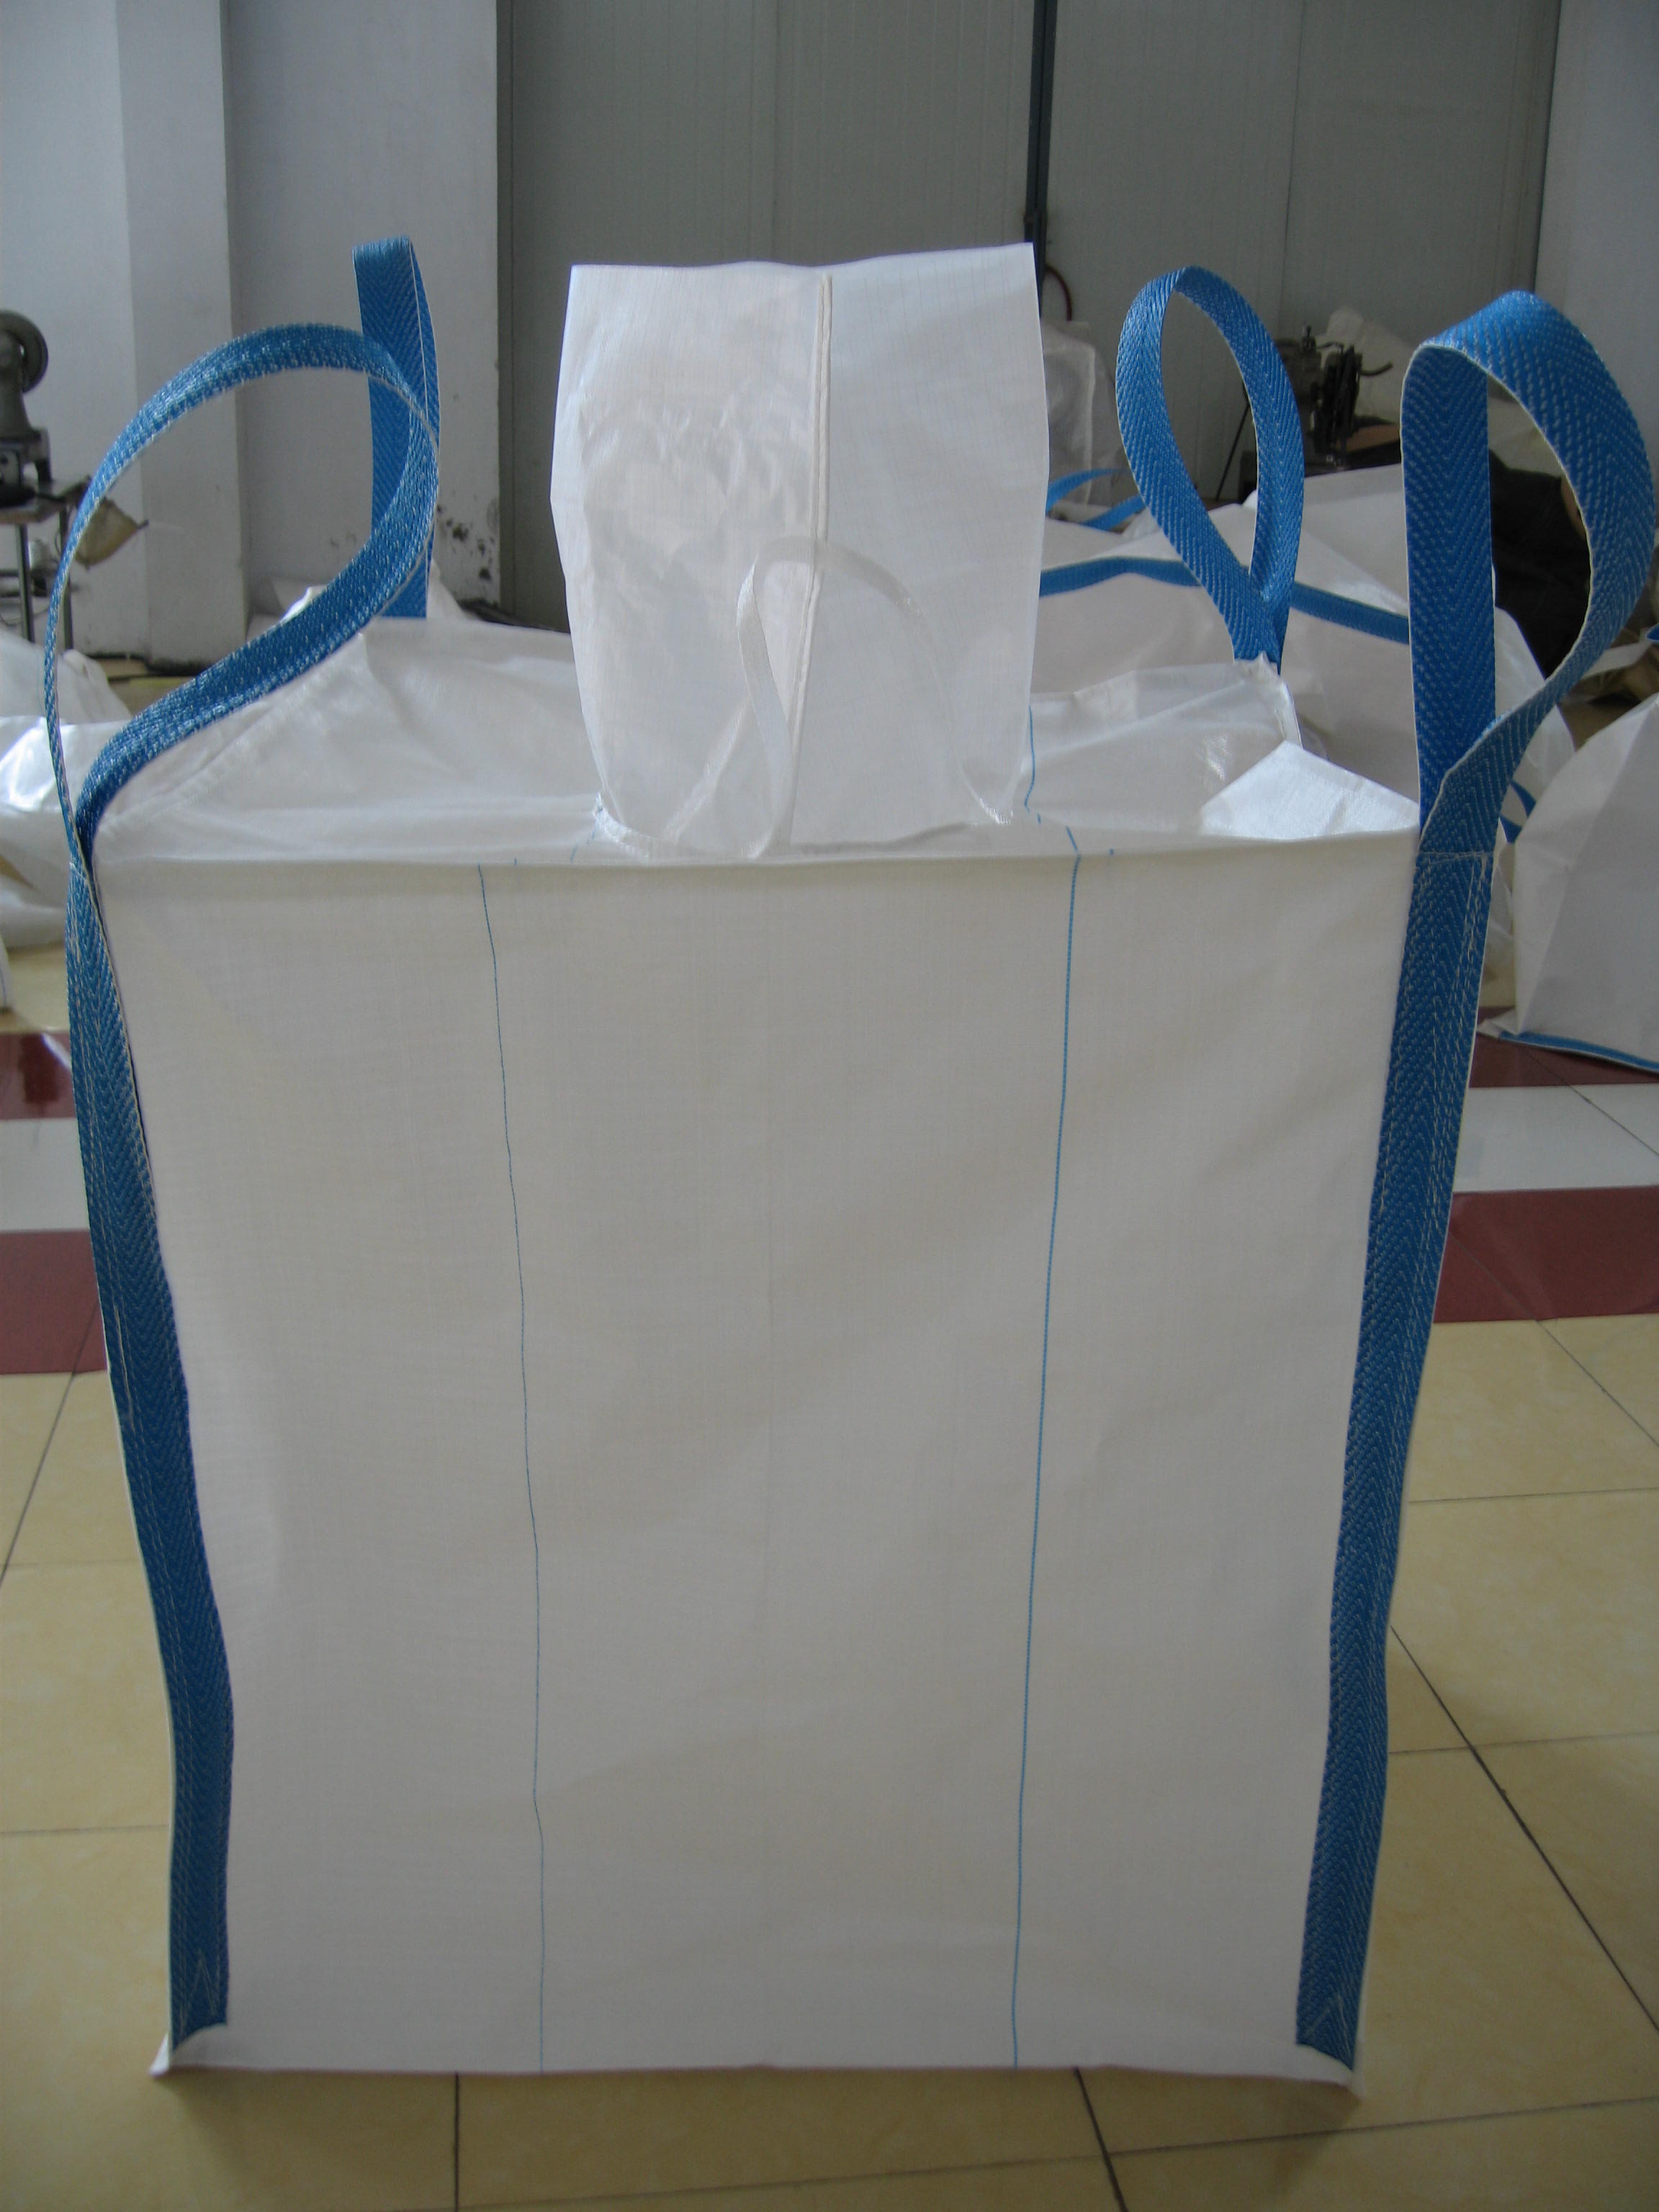  1.5 Ton Side Seam Big Bag FIBC Polypropylene UV Treated  For Industry Manufactures